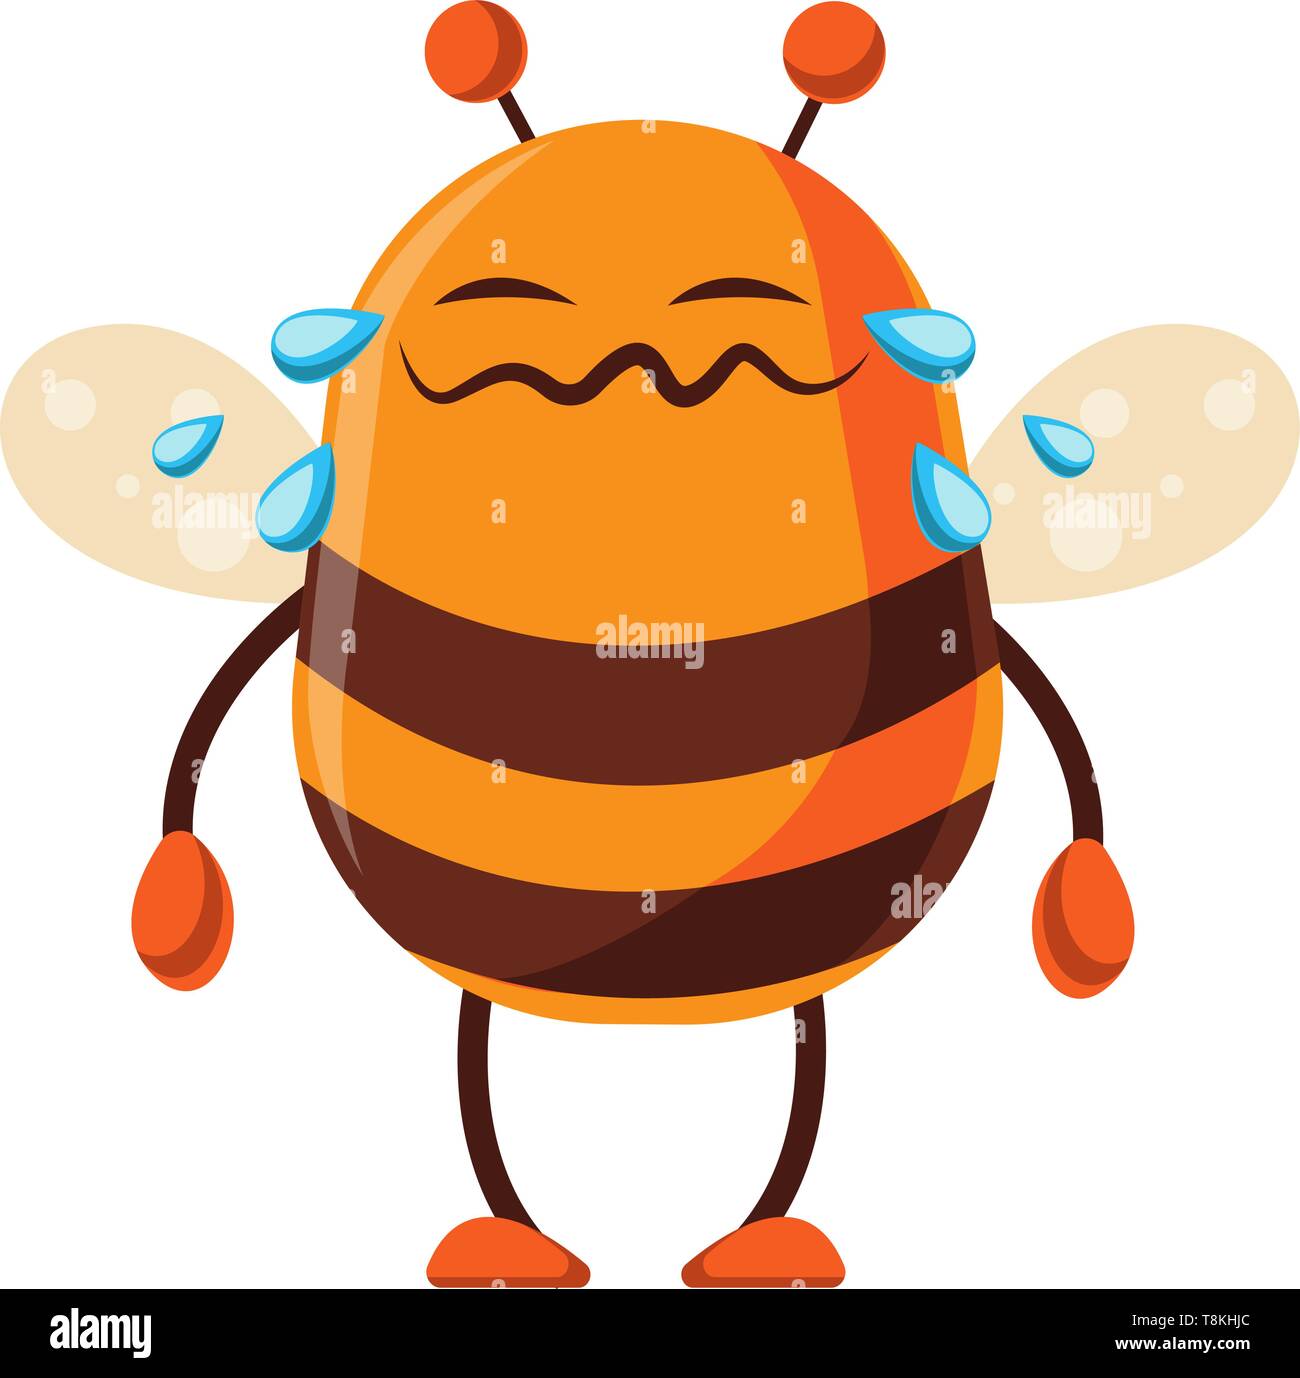 Bee is crying, illustration, vector on white background. Stock Vector